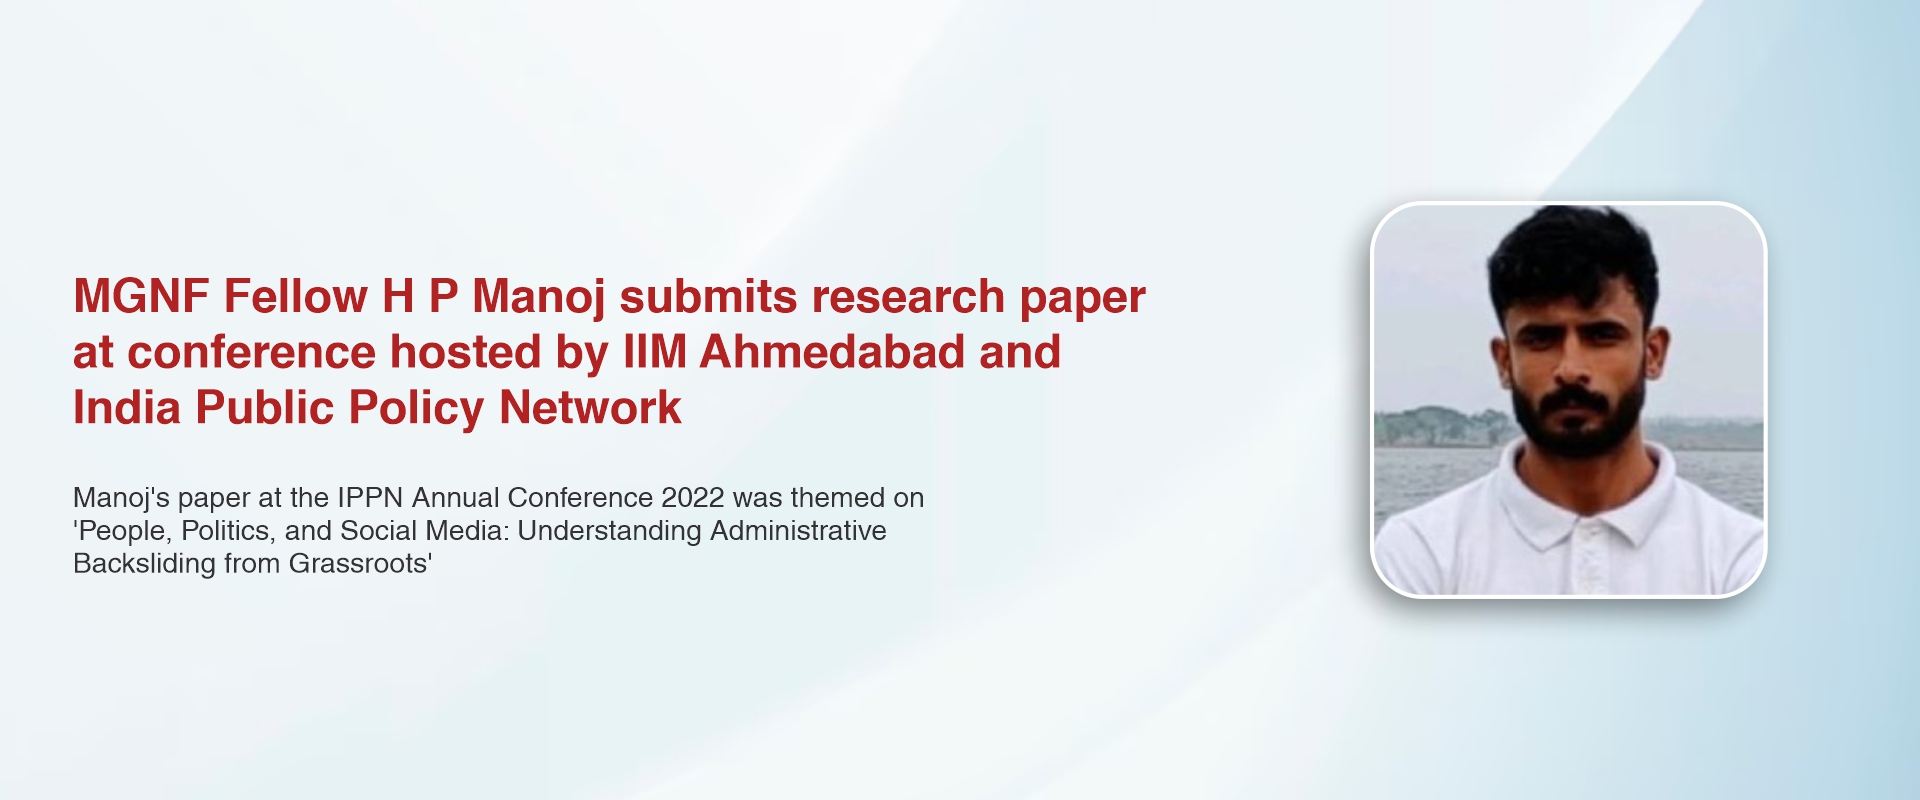 MGNF Fellow H P Manoj submits research paper at conference hosted by IIM Ahmedabad and India Public Policy Network